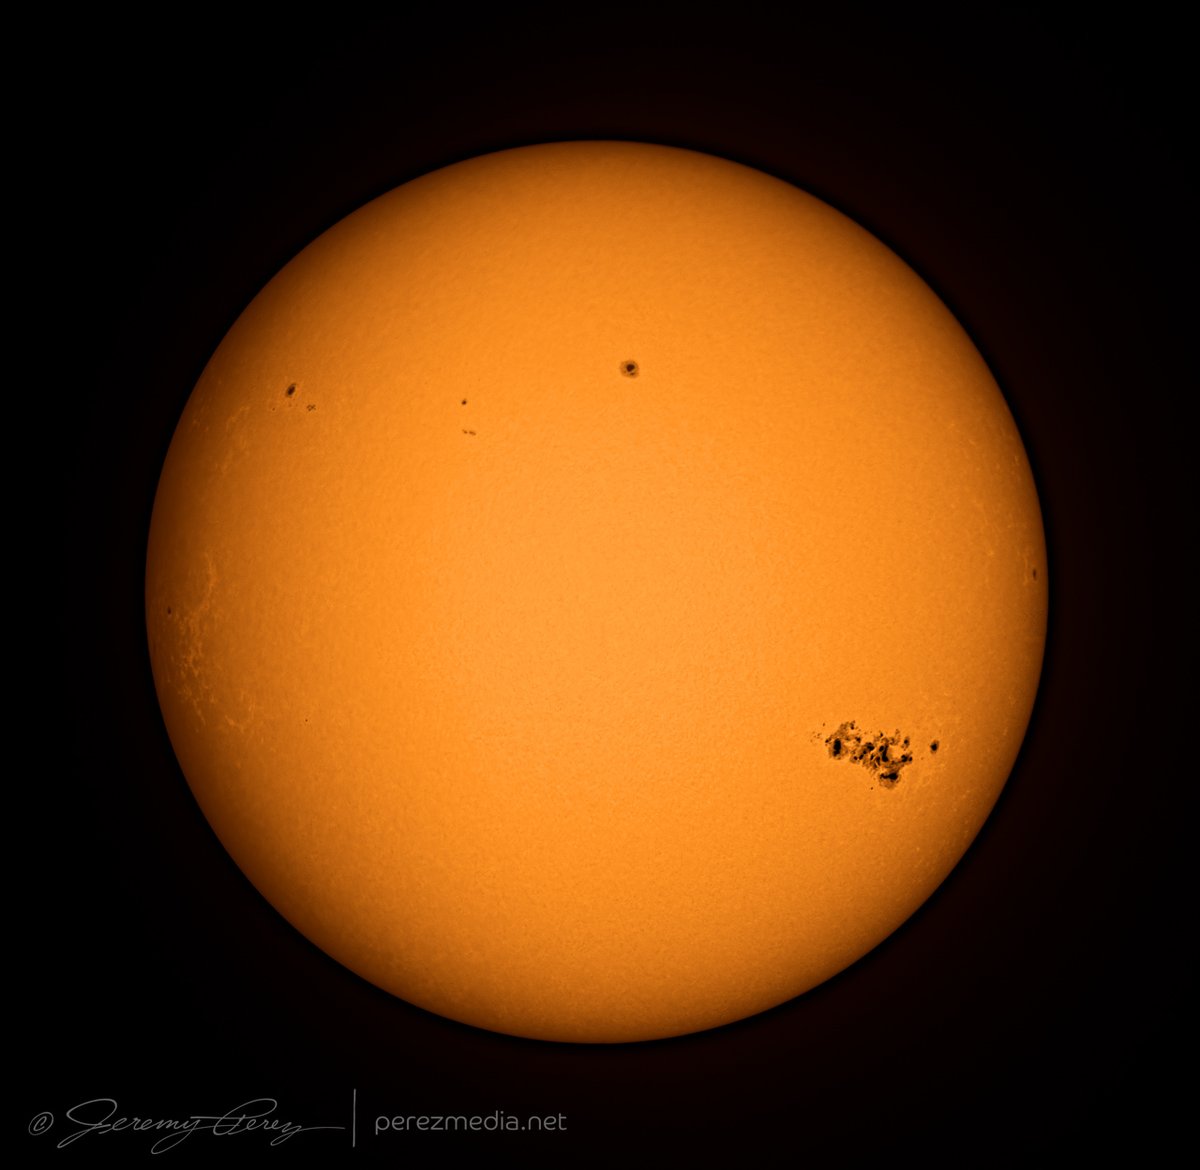 The enormous sunspot group that caused all the hubbub last week before rotating to the back side.

May 10, EOS R5+Orion XT8+Baader filter. 83 frames stacked. Back focus on the XT8 is a sad state & involves handholding the camera with all intervening focus tubes/adapters removed.